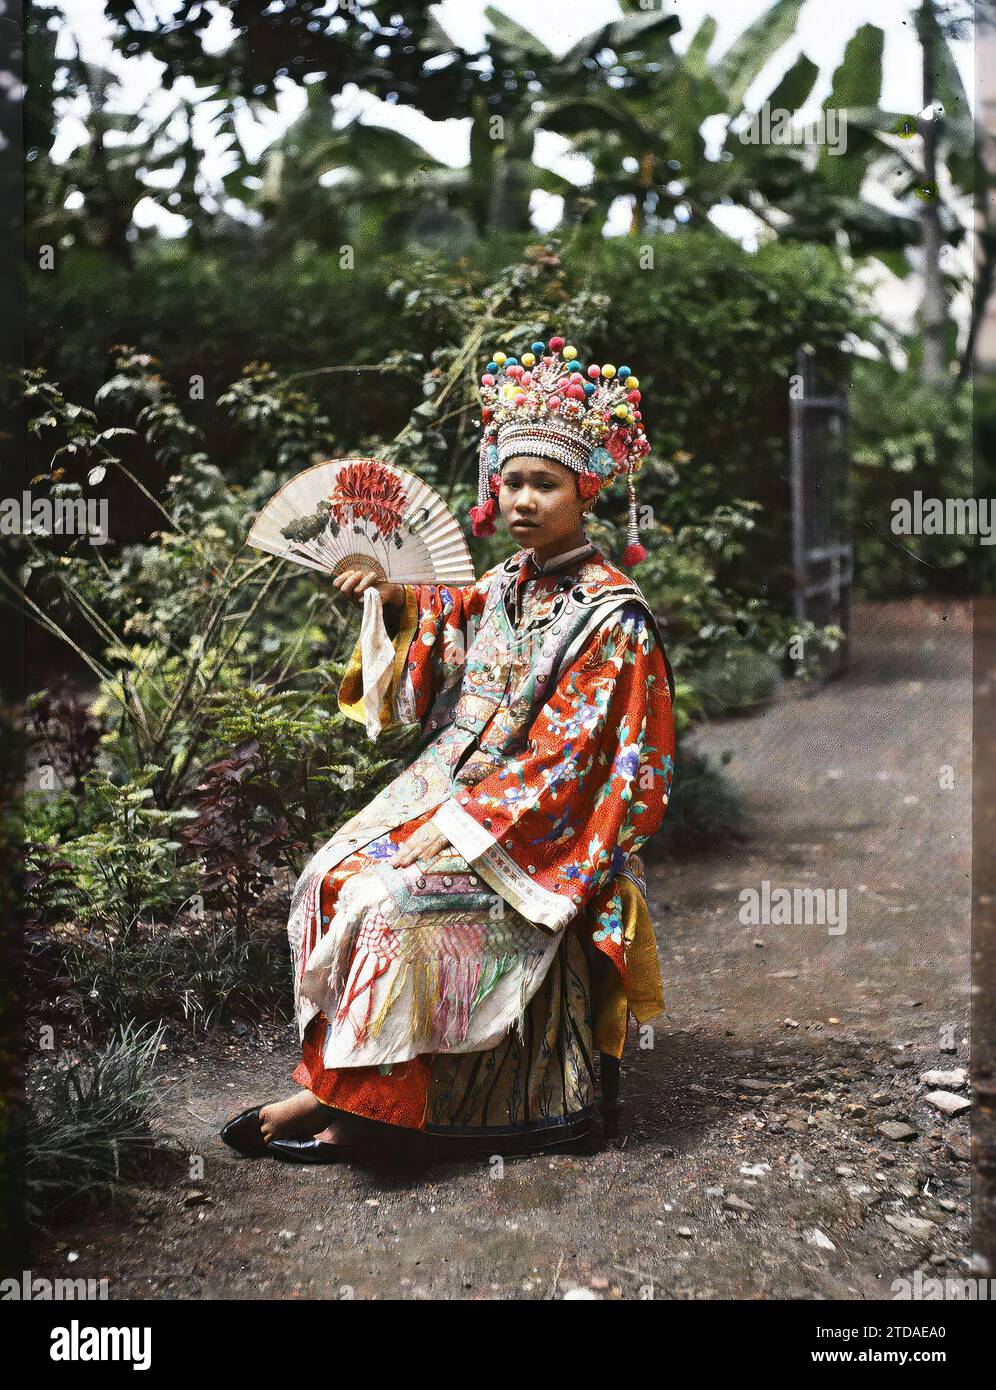 Tonkin, Indochina An actress from the Saigon Theater, in stage costume, fan spread in hand, sitting in a garden, Human beings, Clothing, Habitat, Architecture, Art, Woman, Performance costume, Shoe, Fan, Portrait, Accessory, Hairstyle, headgear, Park, Garden, Theater, Indochina, Tonkin, Actors - Saigon Theater, Solo actress, Hà-nôi, Hainoi Vietnam, 01/09/1915 - 30/11/1915, Busy, Léon, Léon Busy photographer en Indochine, Autochrome, photo, Glass, Autochrome, photo, Positive, Vertical, Size 9 x 12 cm Stock Photo